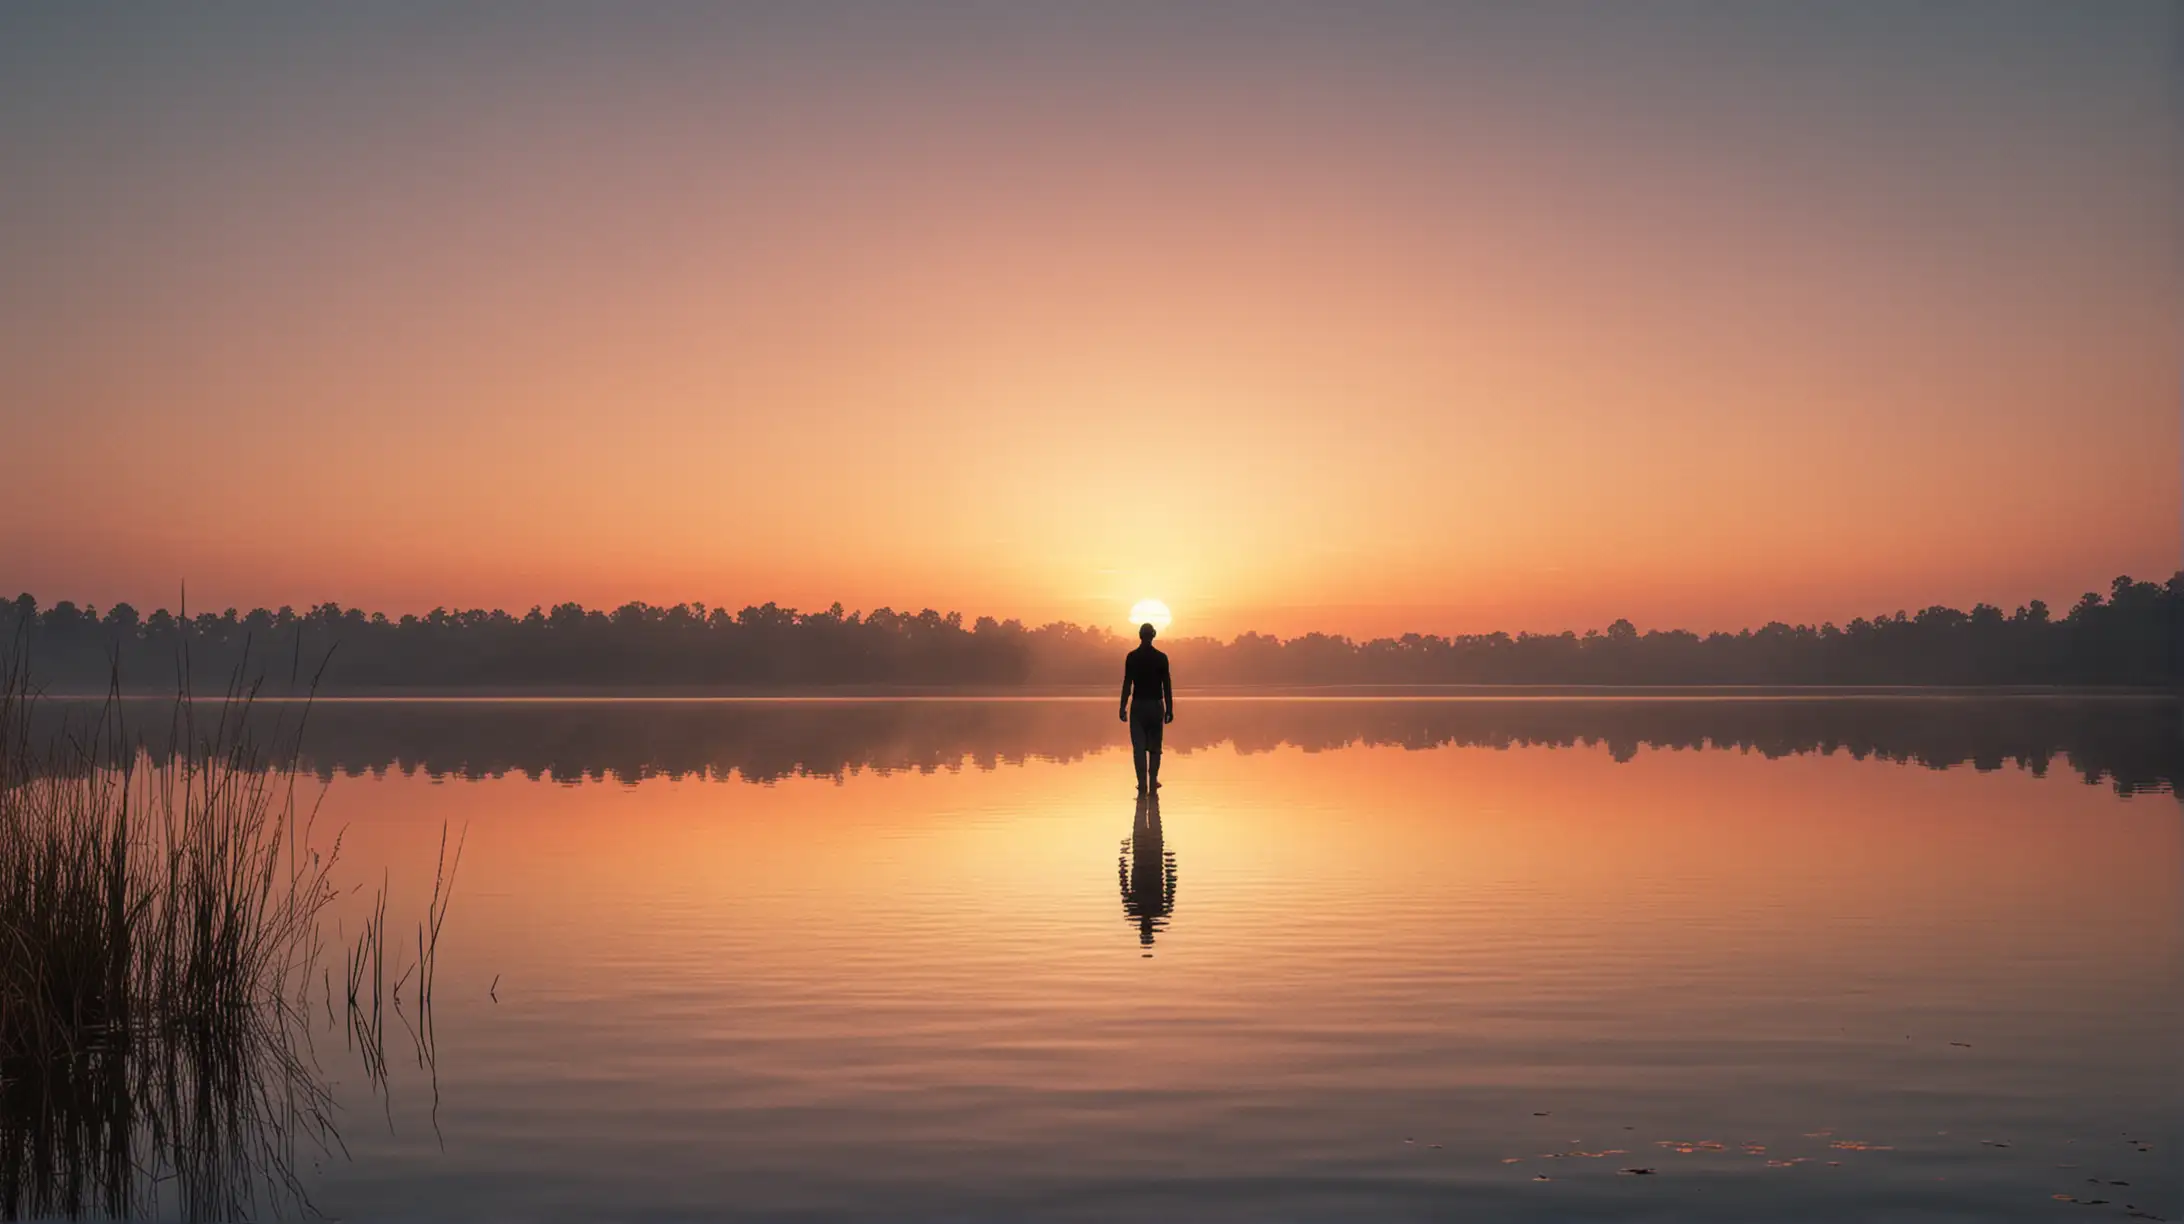 Philosopher Contemplating Transience at Sunset by Tranquil Lake